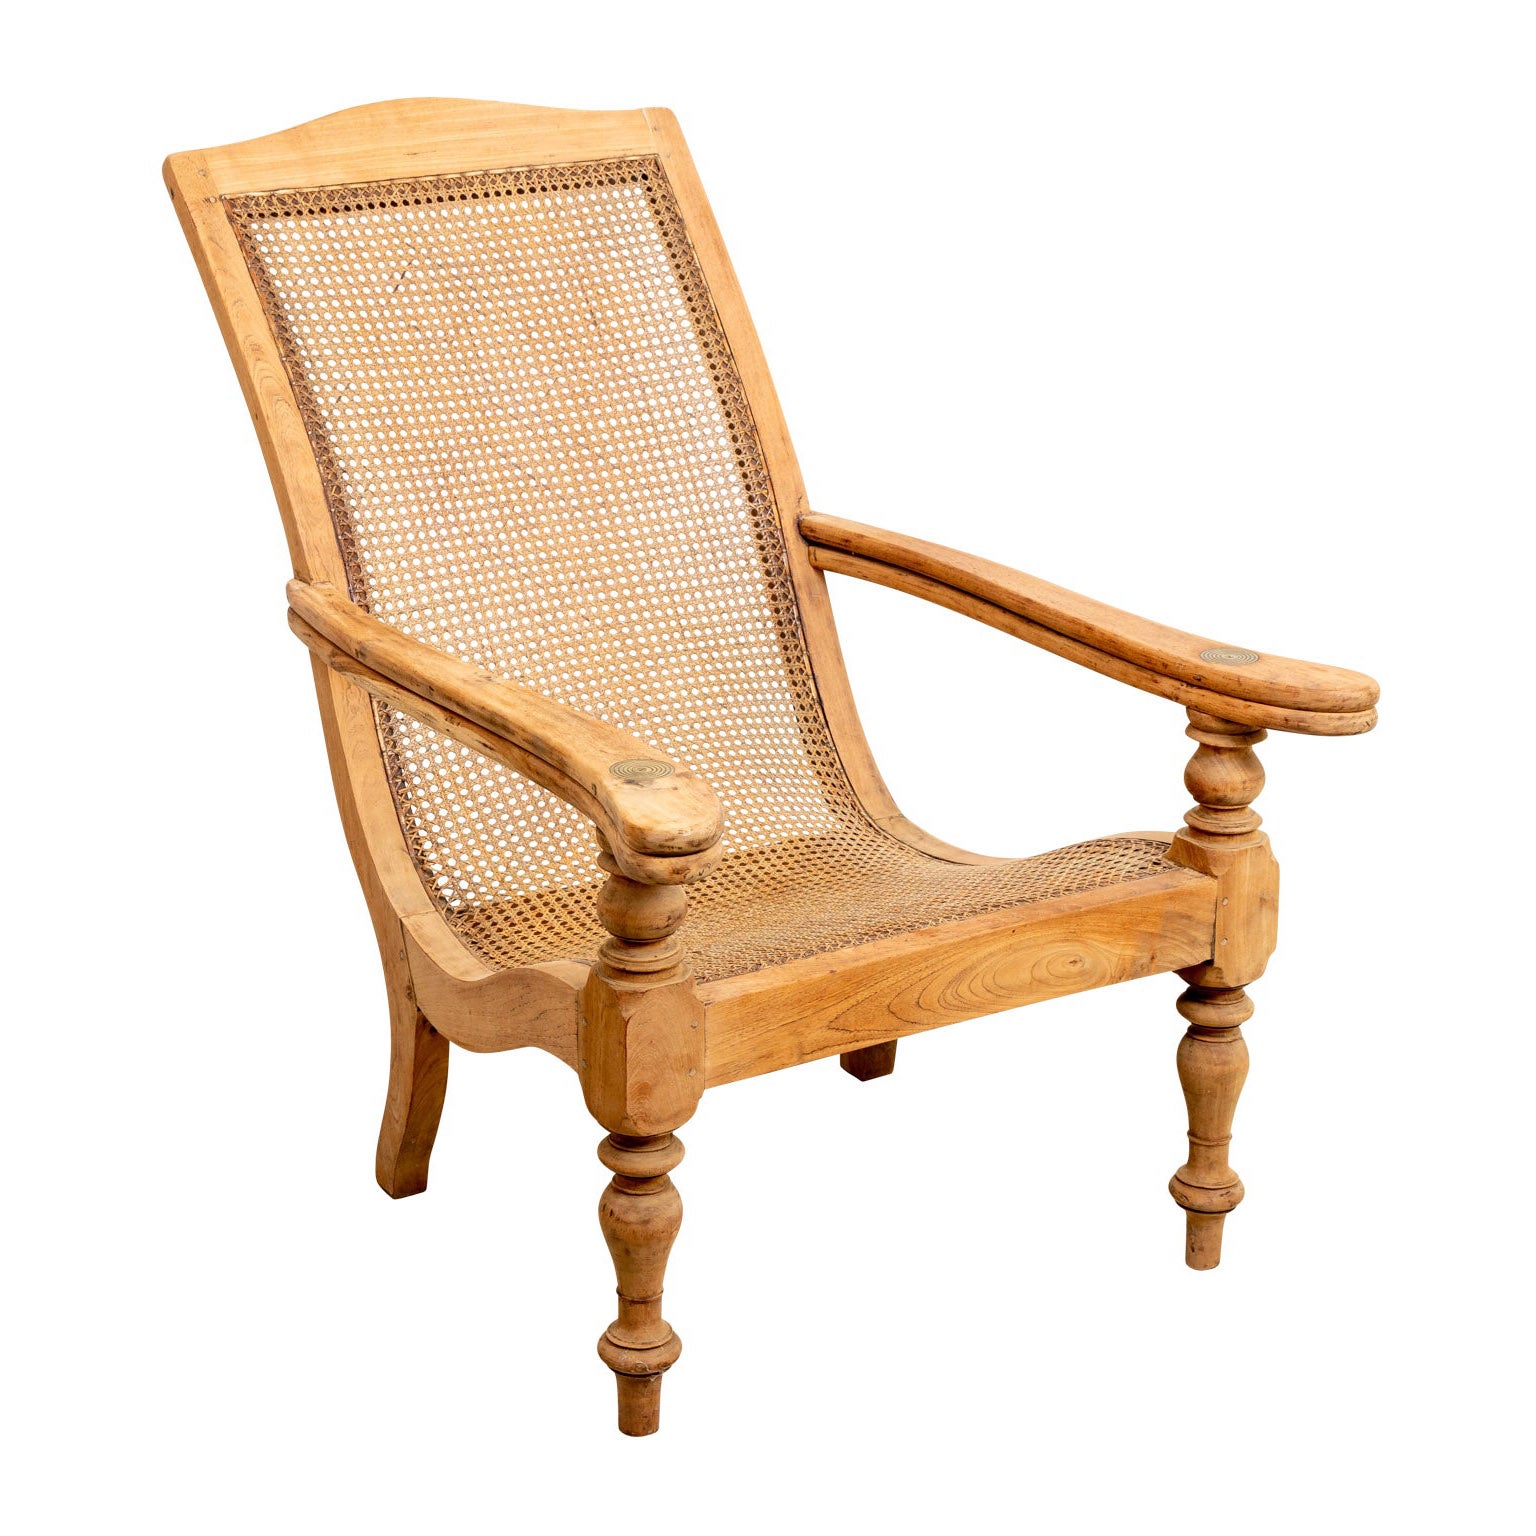 Cane Woven Plantation Armchair with Wood Frame